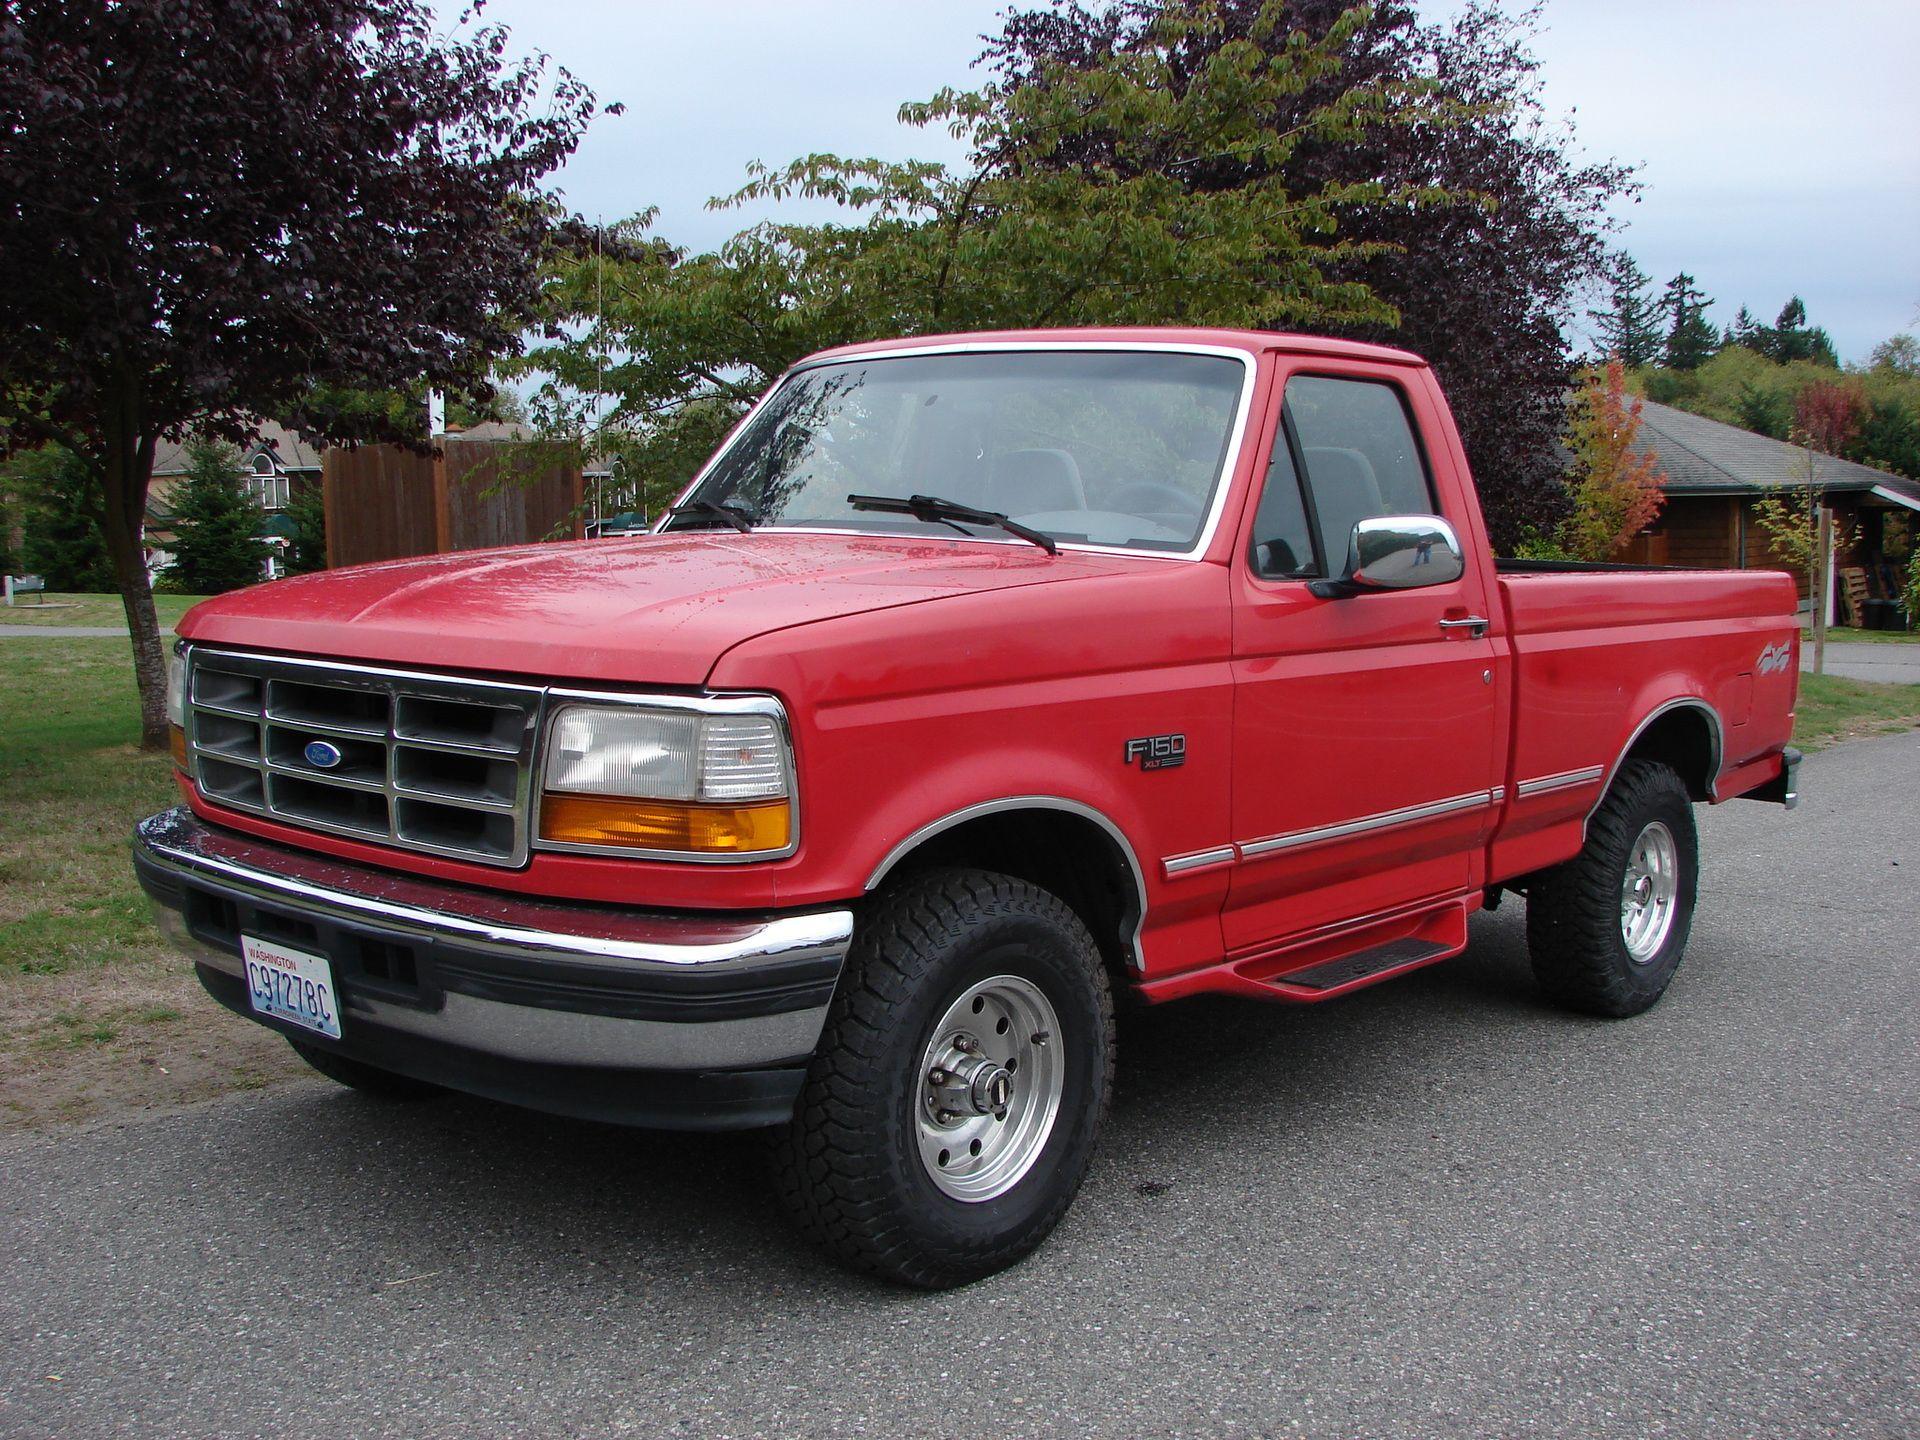 Ford Image 1996 Ford F 150 XLT 4x4 HD Wallpaper And Background